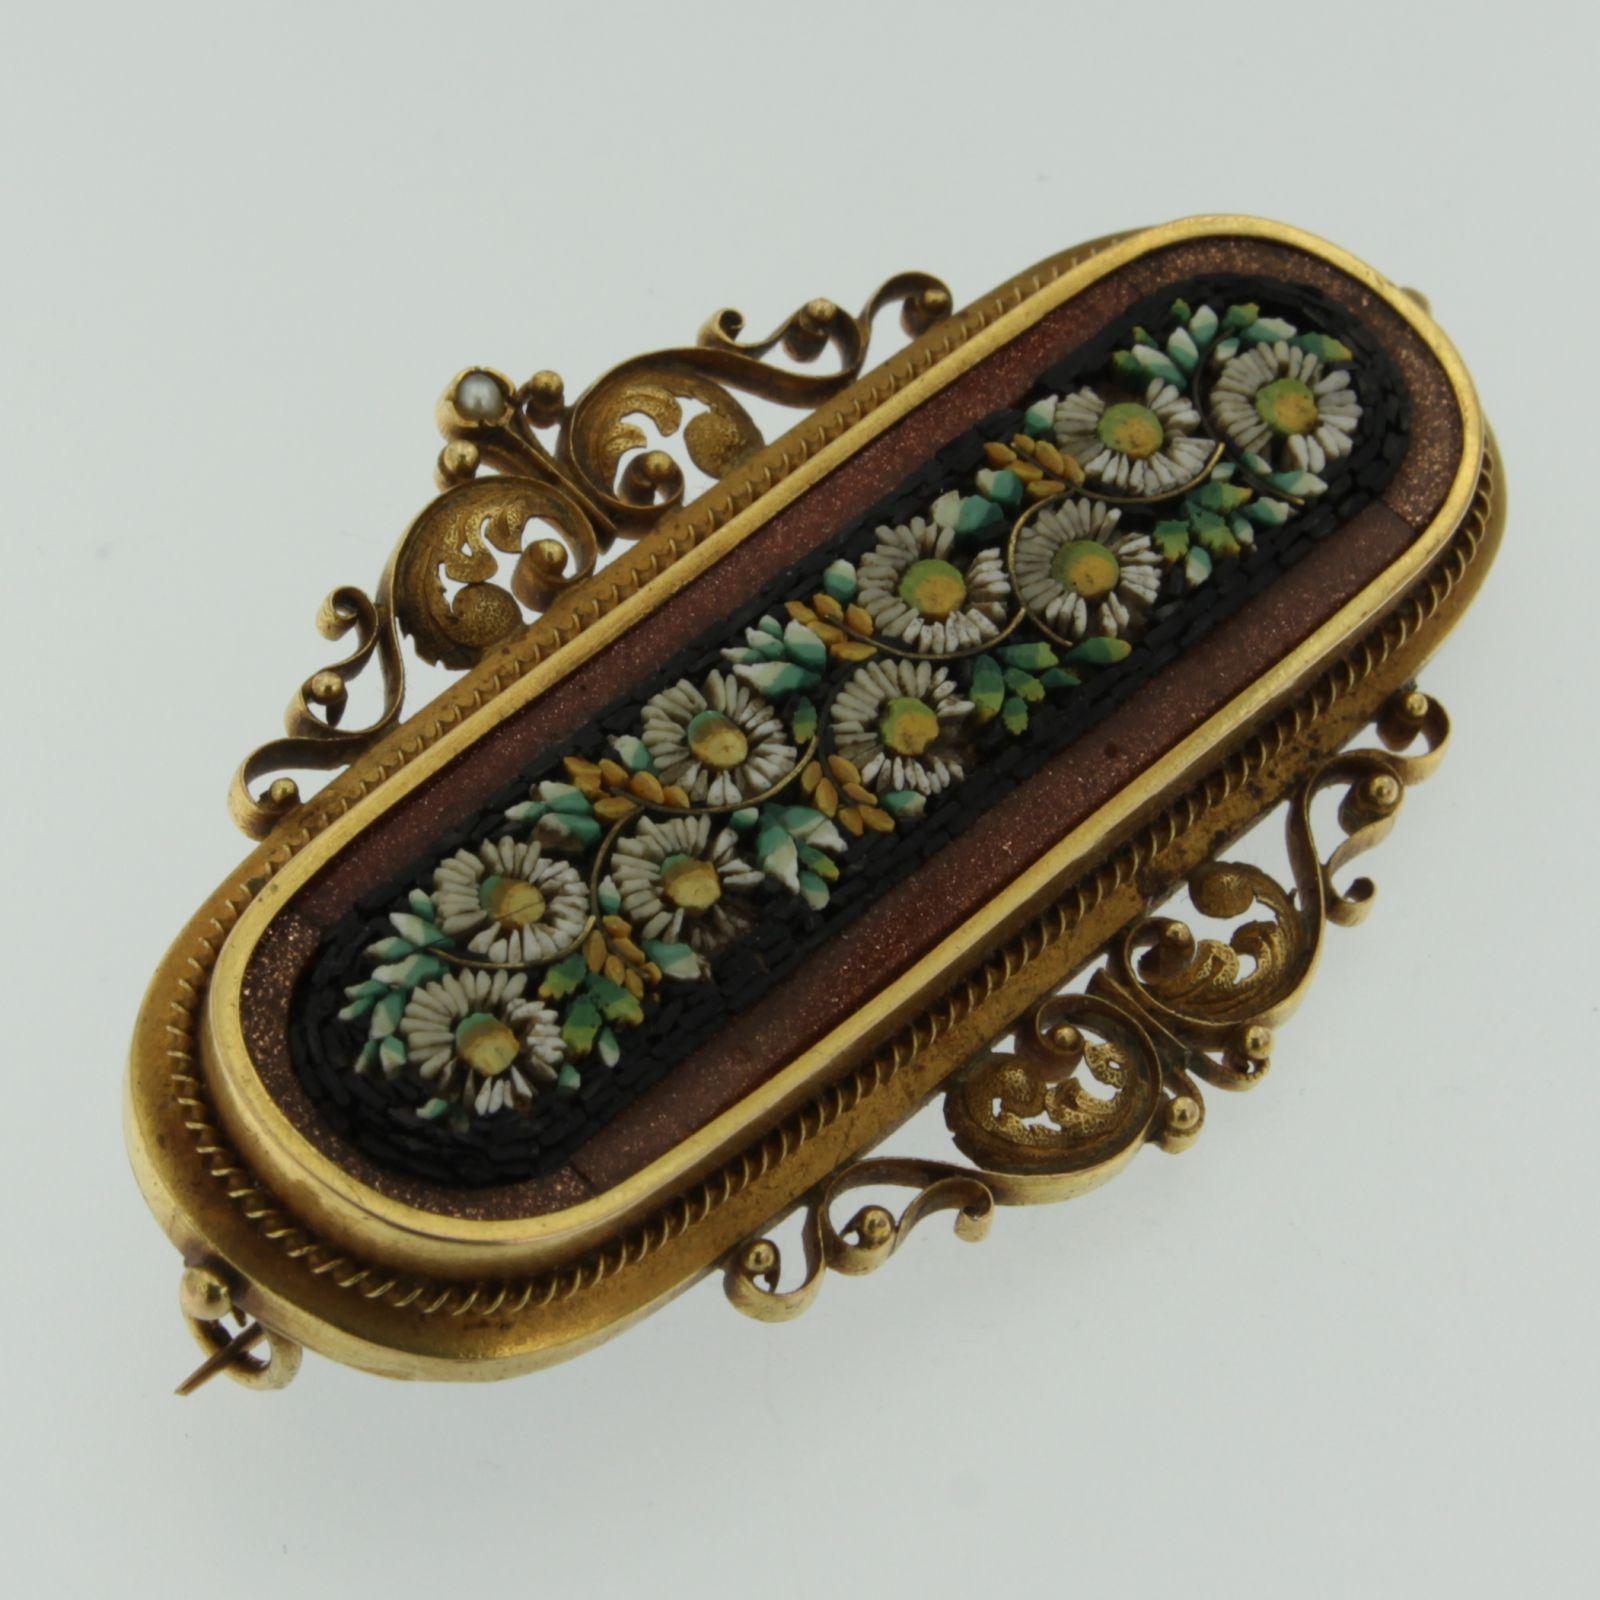 An unique old 19th century micro mosaic brooch mounted in 14k yellow gold. 

Flowers and leaves, on goldstone.

Some flowers has little damages - see pictures, but overall condition is good

